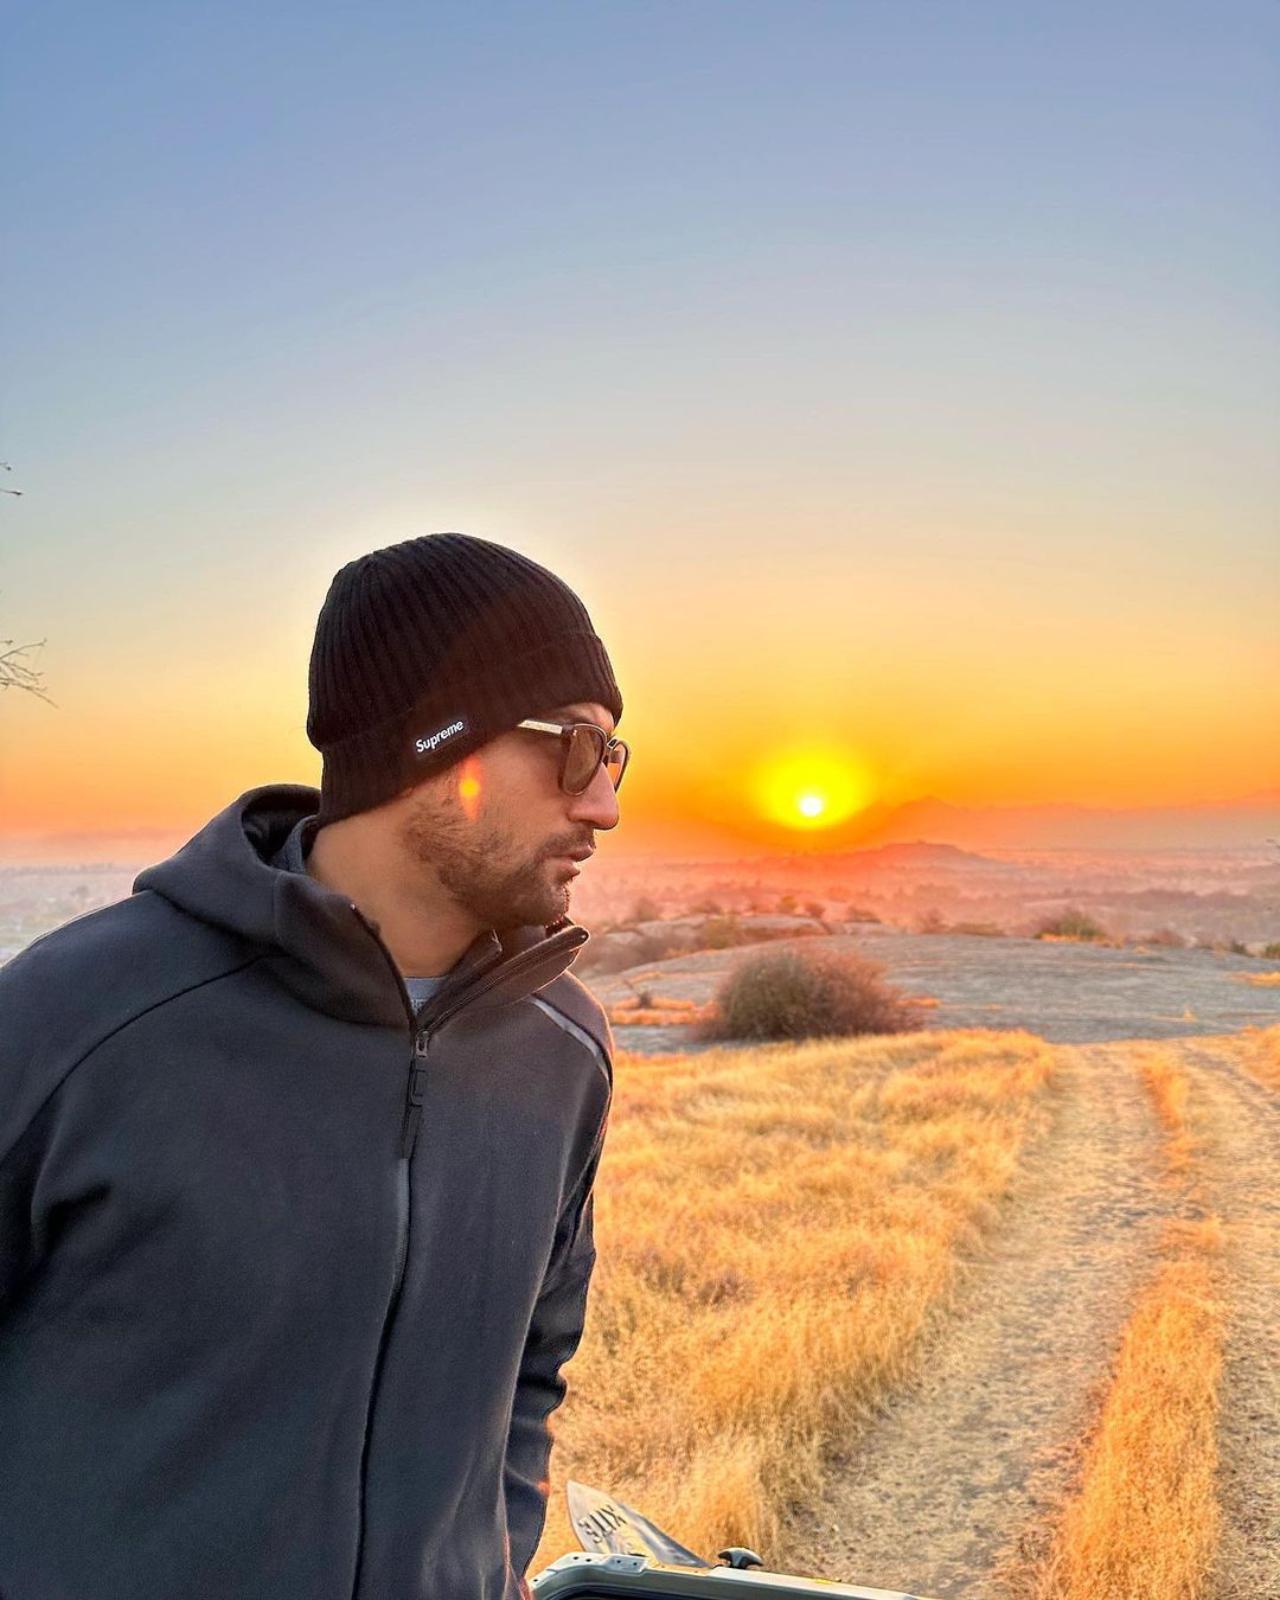 On Wednesday, Vicky took to his Instagram handle and shared a picture of himself in the backdrop of a beautiful sunset. Sharing the picture, he wrote, 